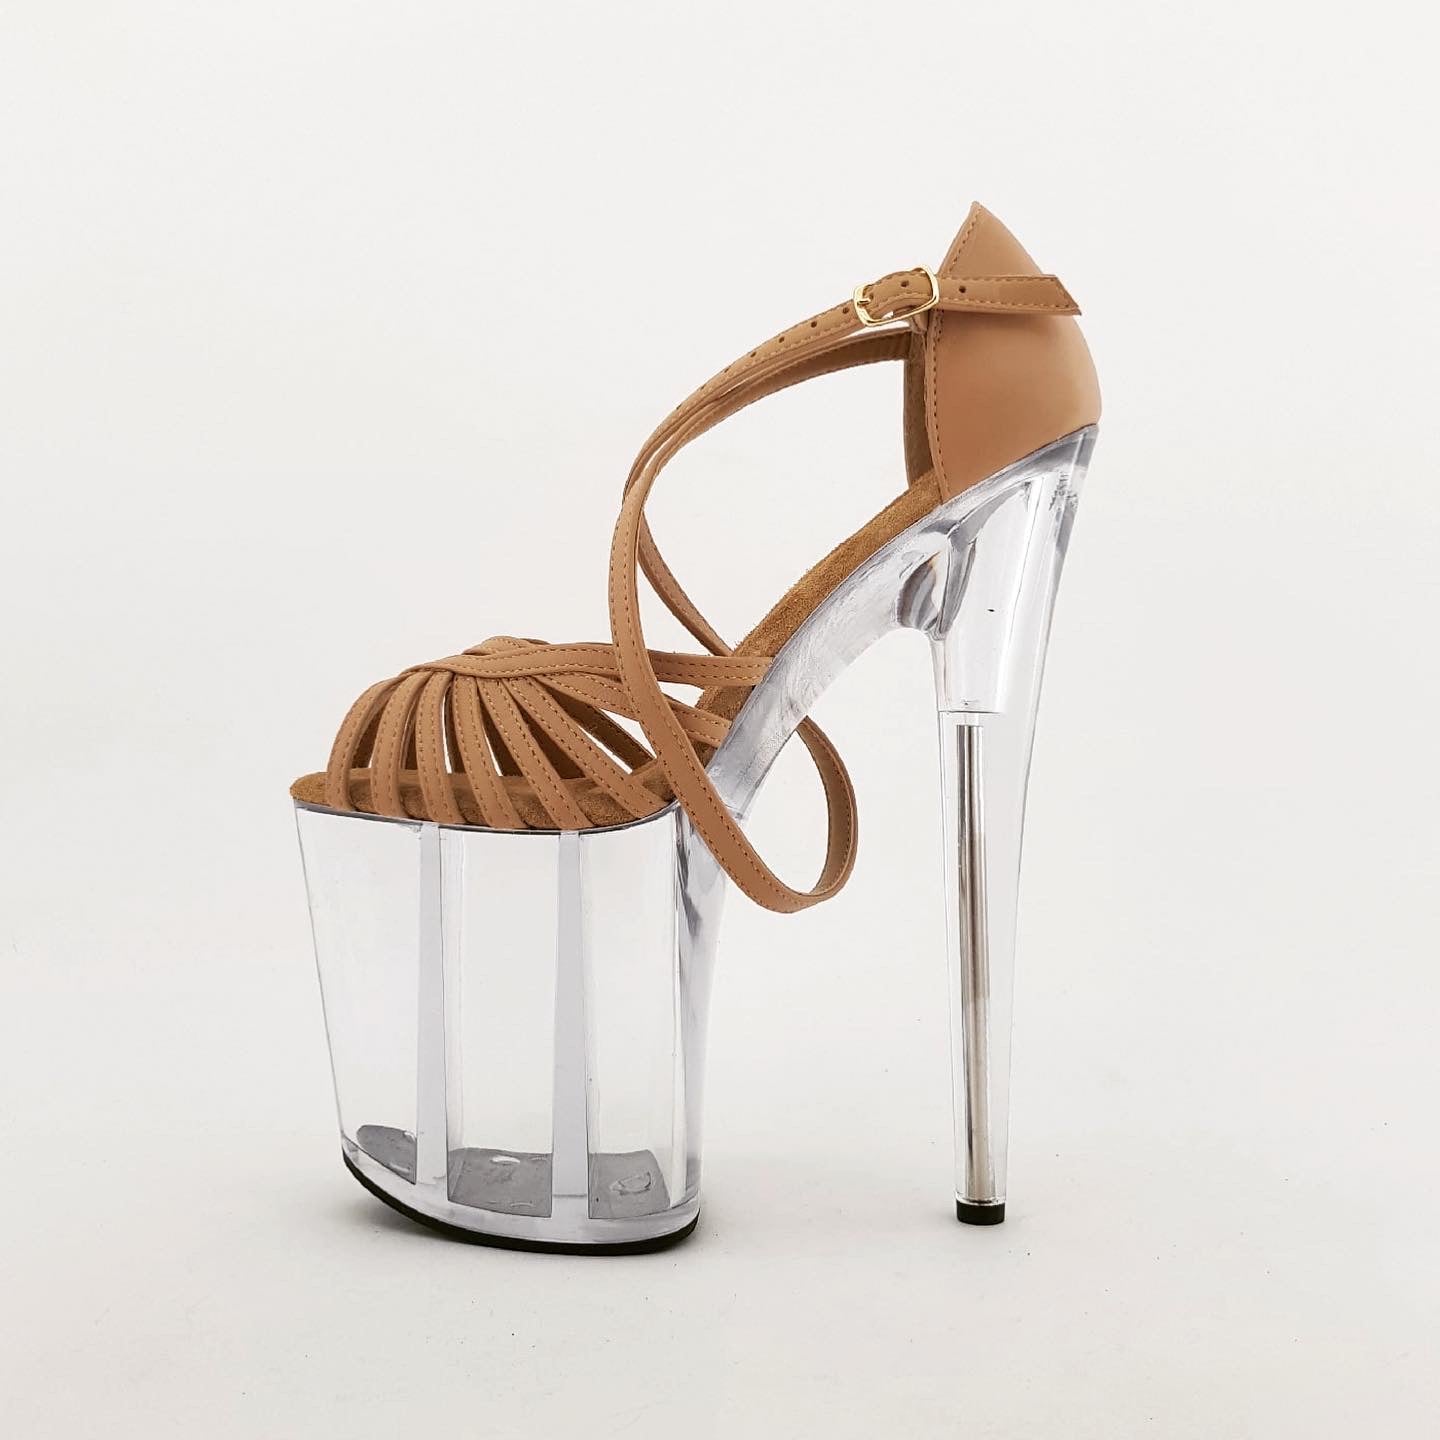 Spider long strap tan leather clear platform sandals (more colors are available)